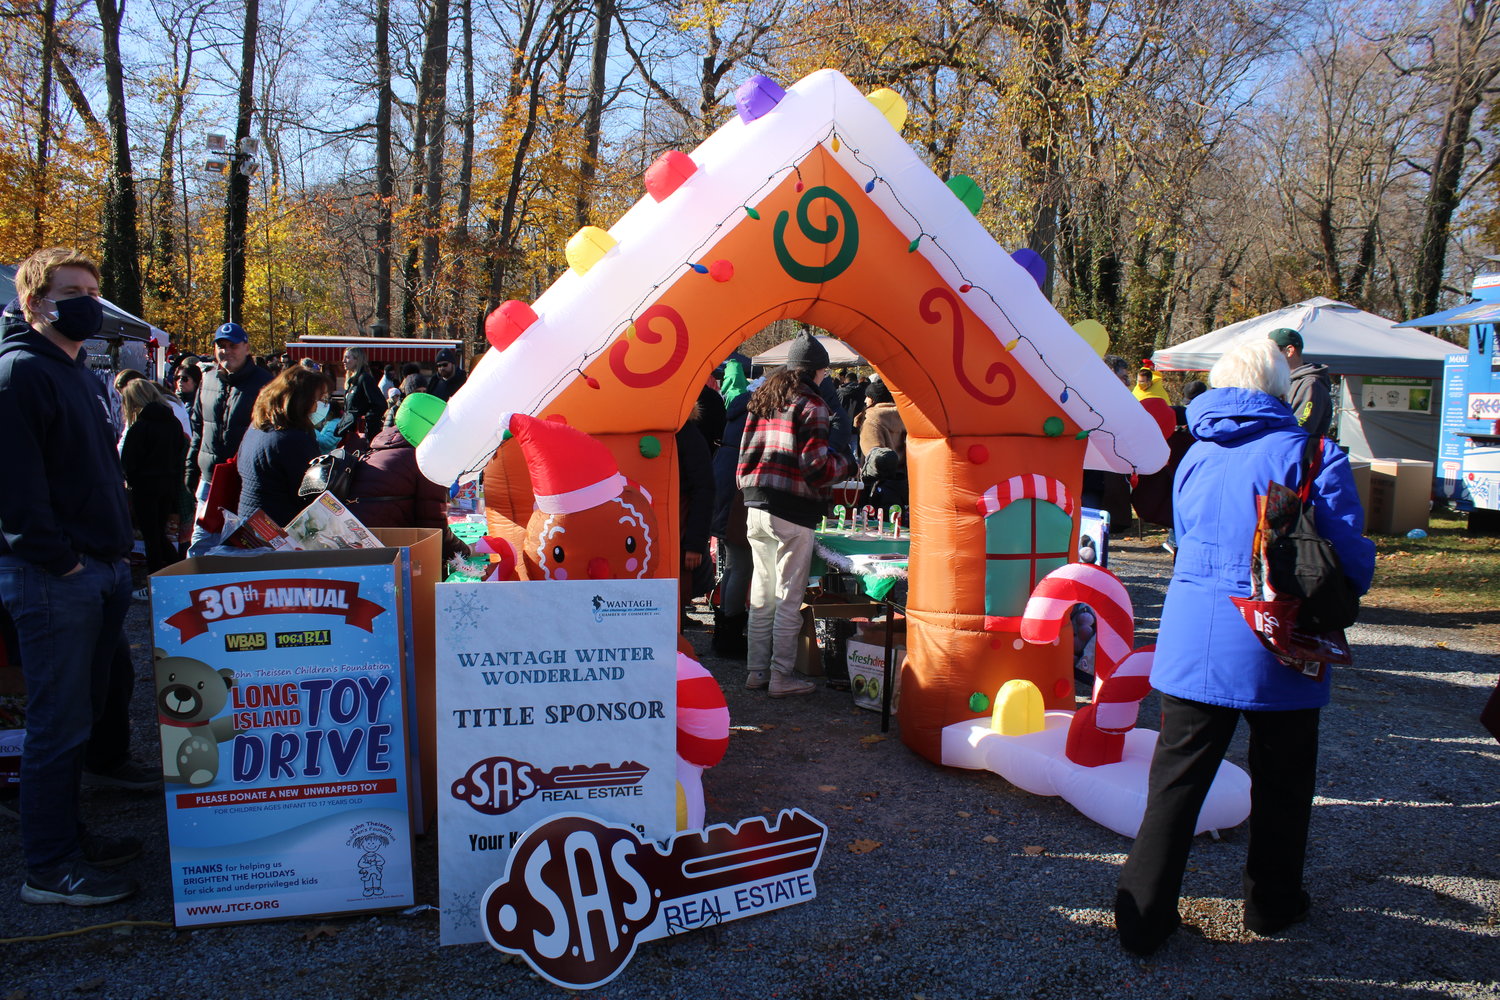 An inflatable gingerbread house welcomed residents to the festival.